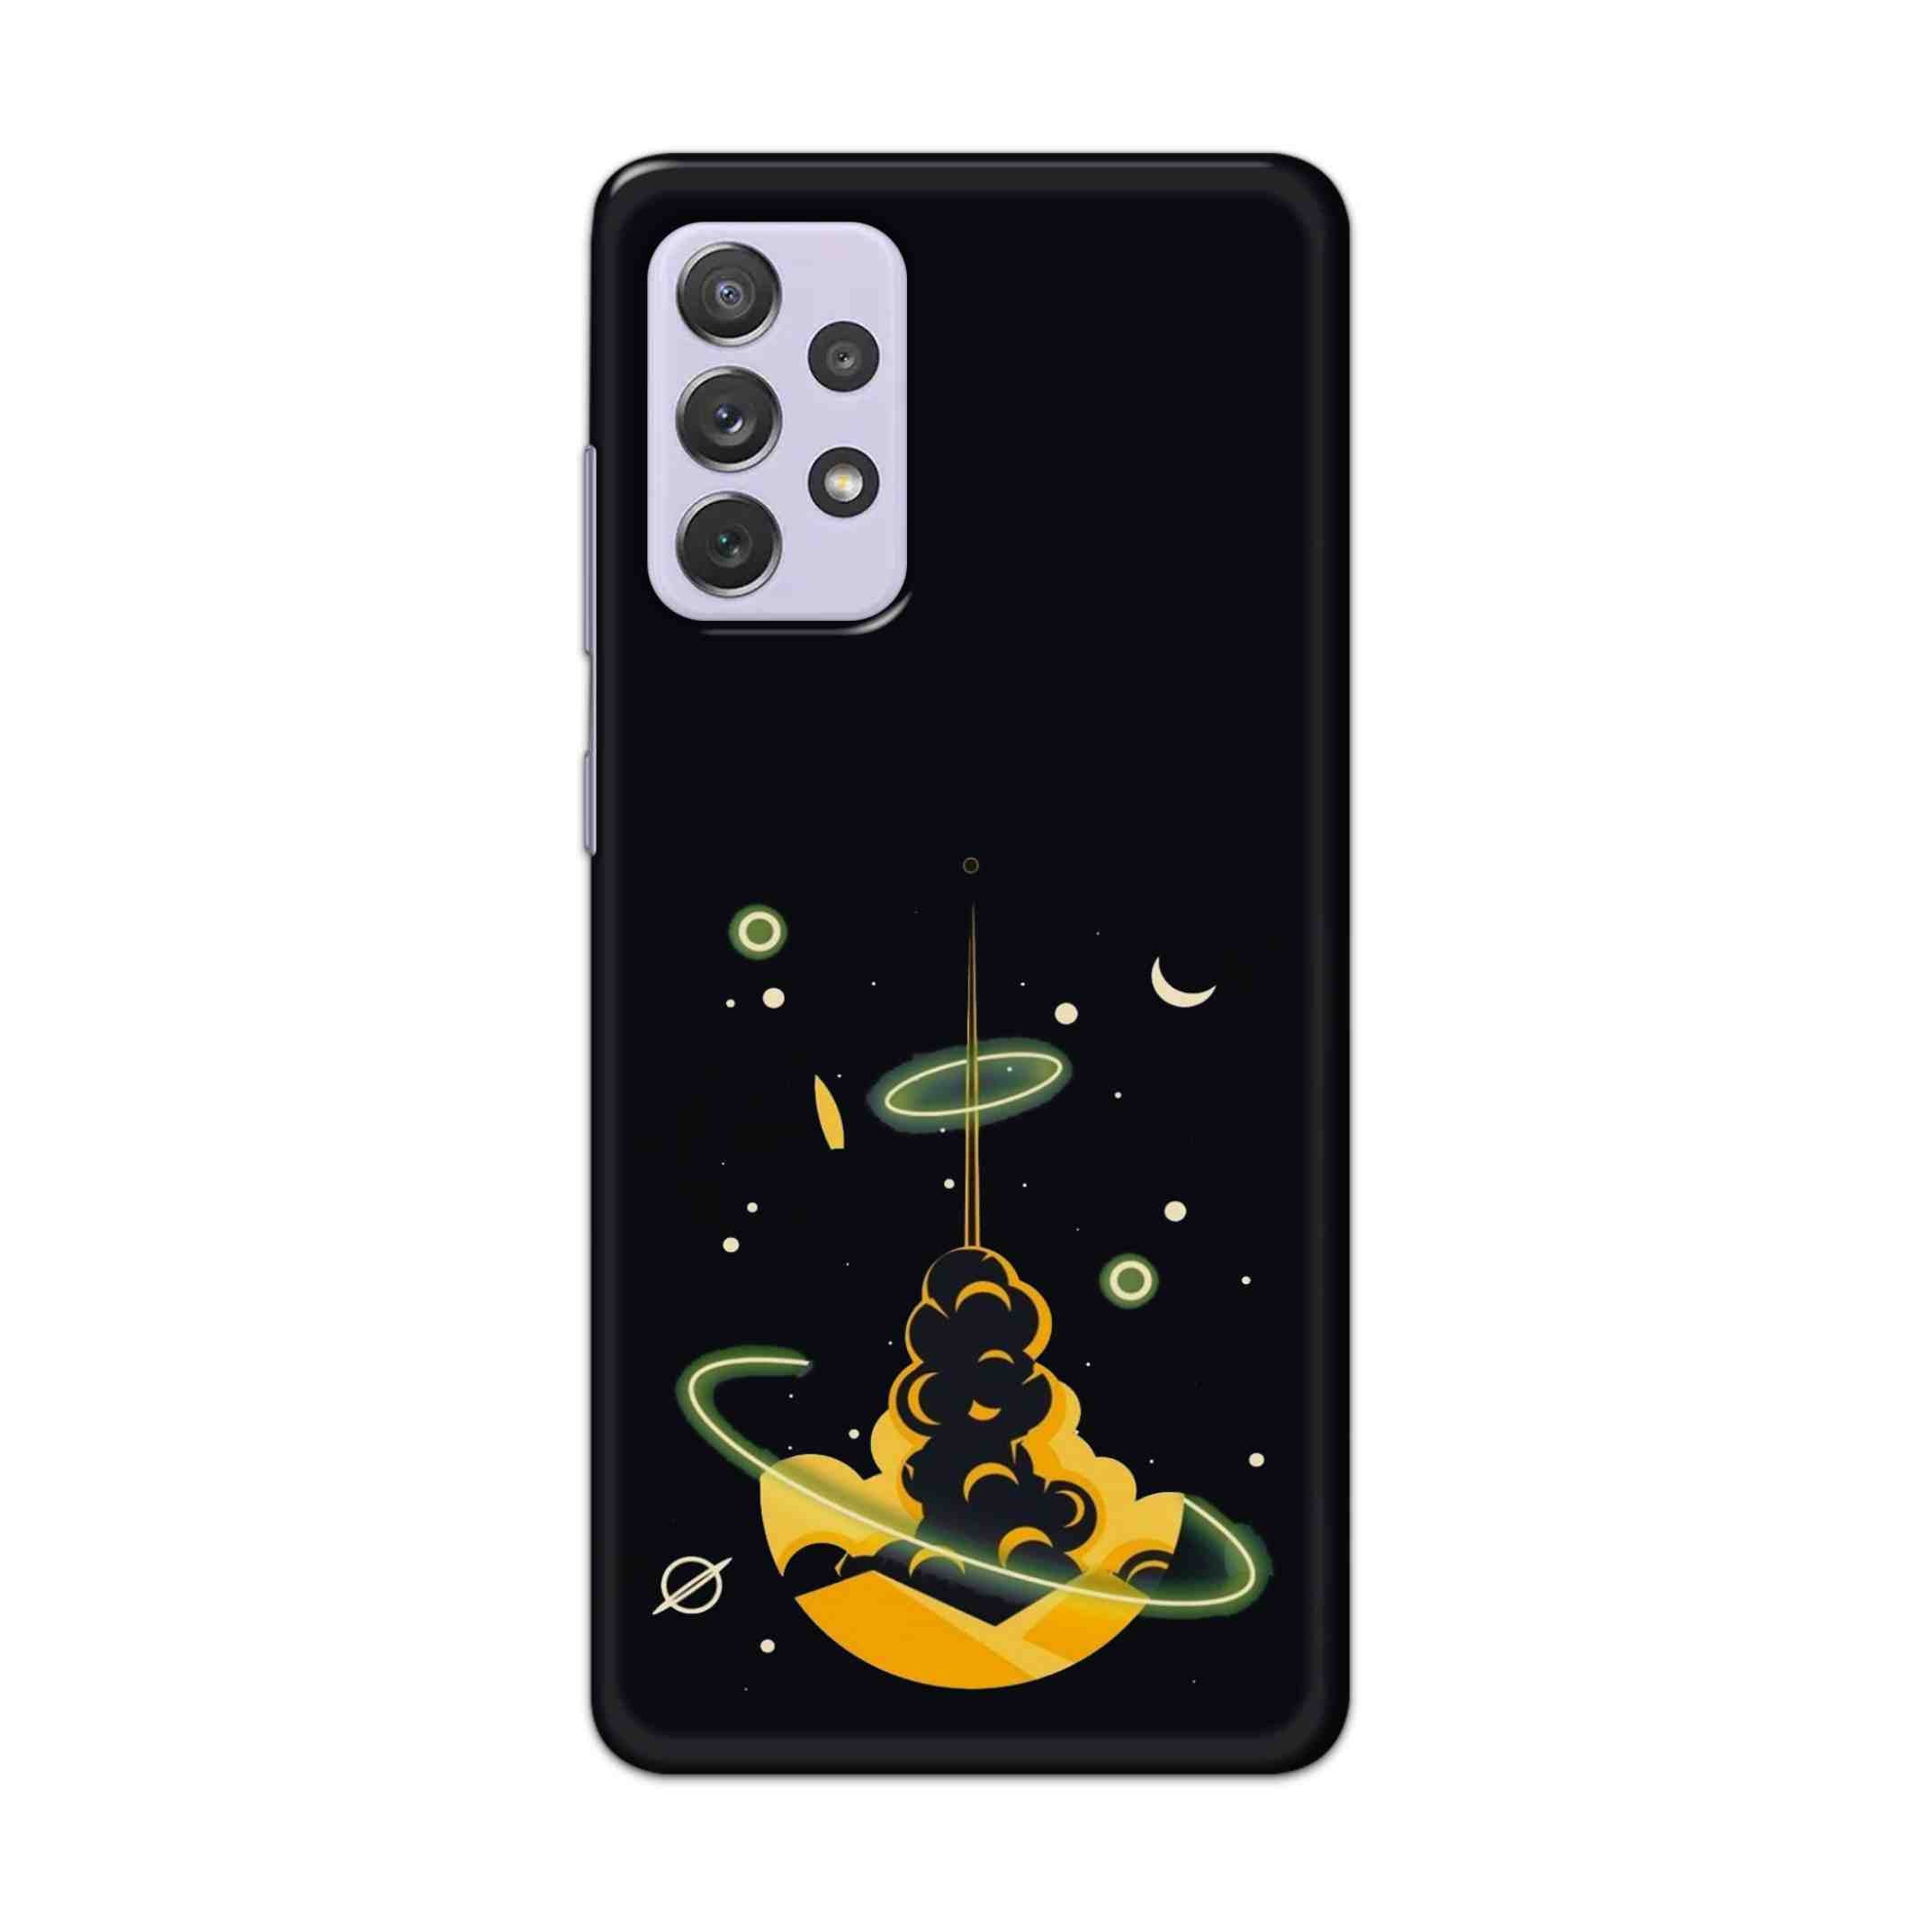 Buy Moon Hard Back Mobile Phone Case Cover For Samsung Galaxy A72 Online